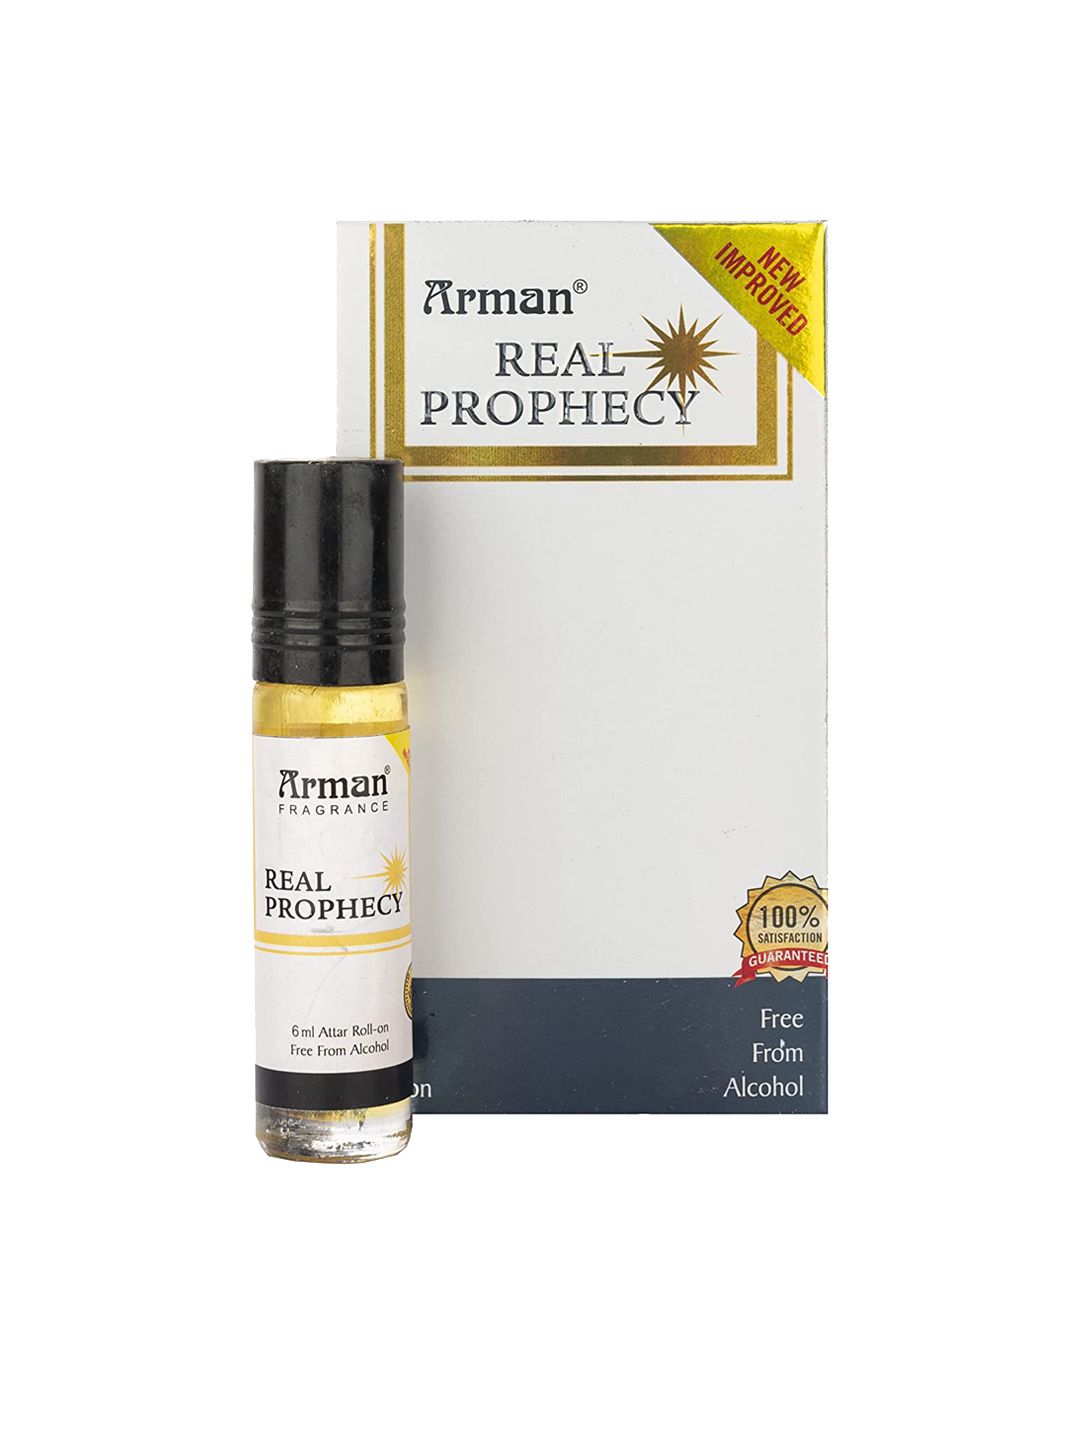 Arman Long Lasting Alcohol Free Real Prophecy Attar Roll On - 6 ml Price in India